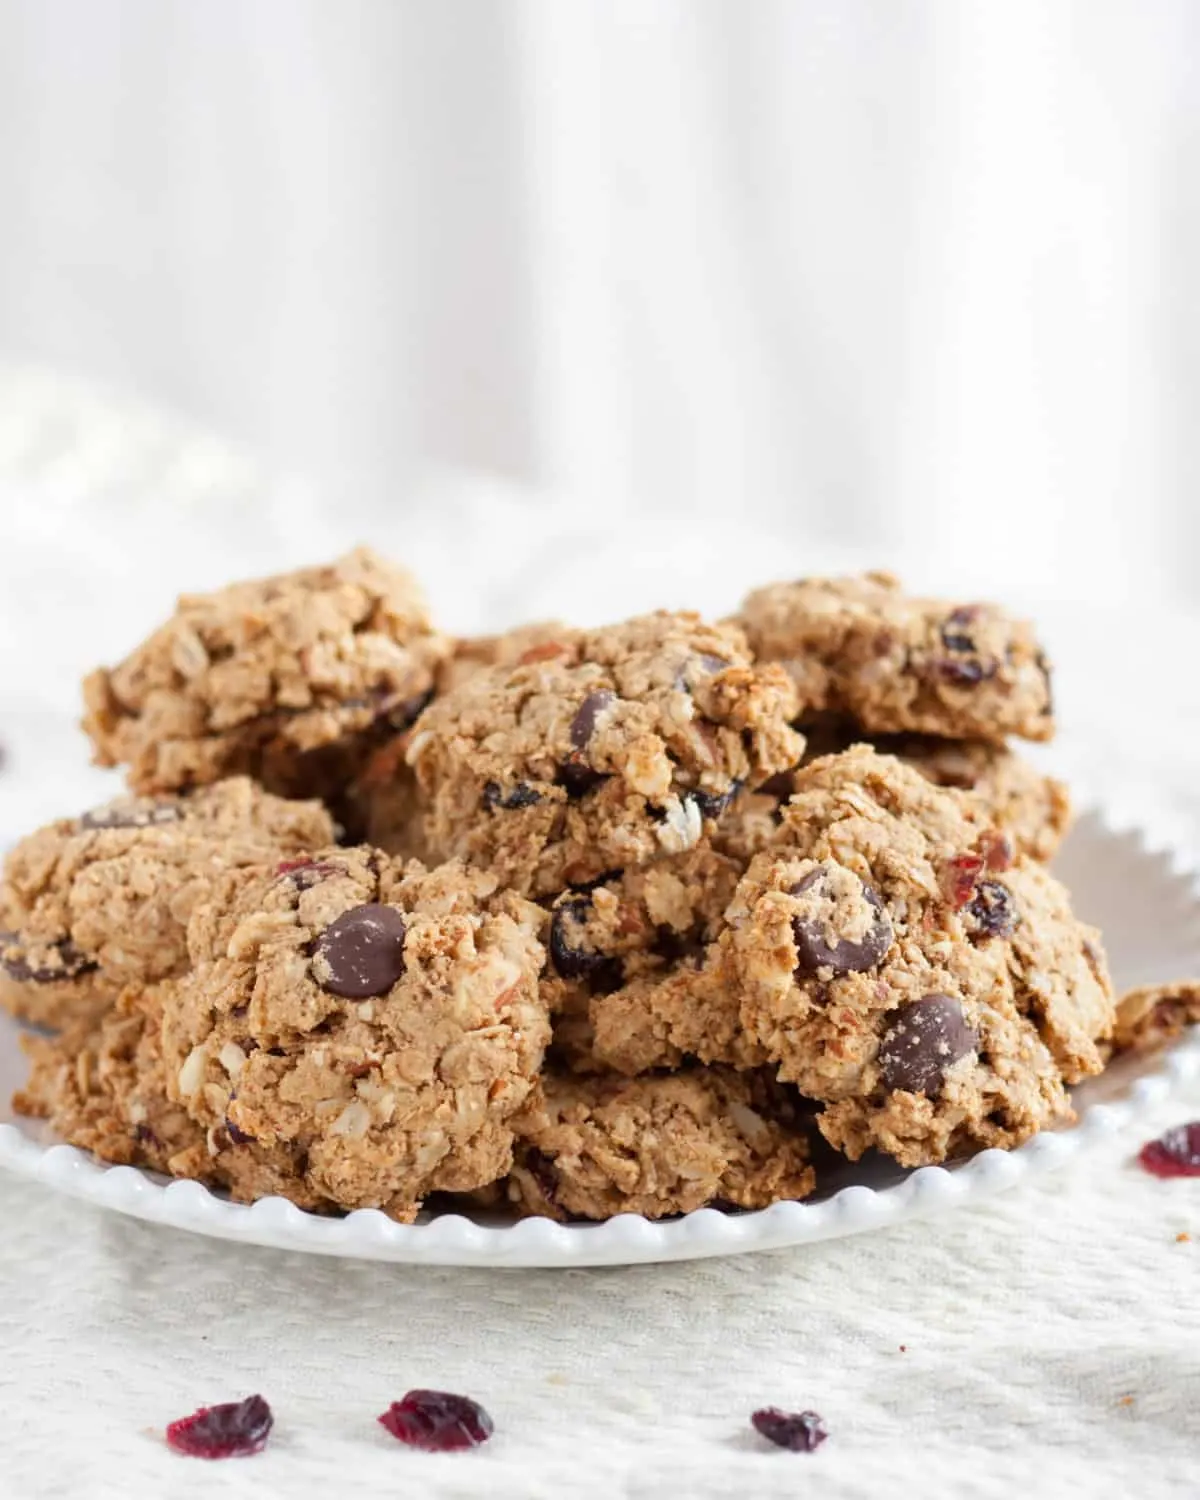 Loaded with oats, nuts, dried cranberries, and dark chocolate, these make-ahead breakfast cookies are freezer-friendly & pair perfectly with a latte or milk. Recipe on GoodieGodmother.com